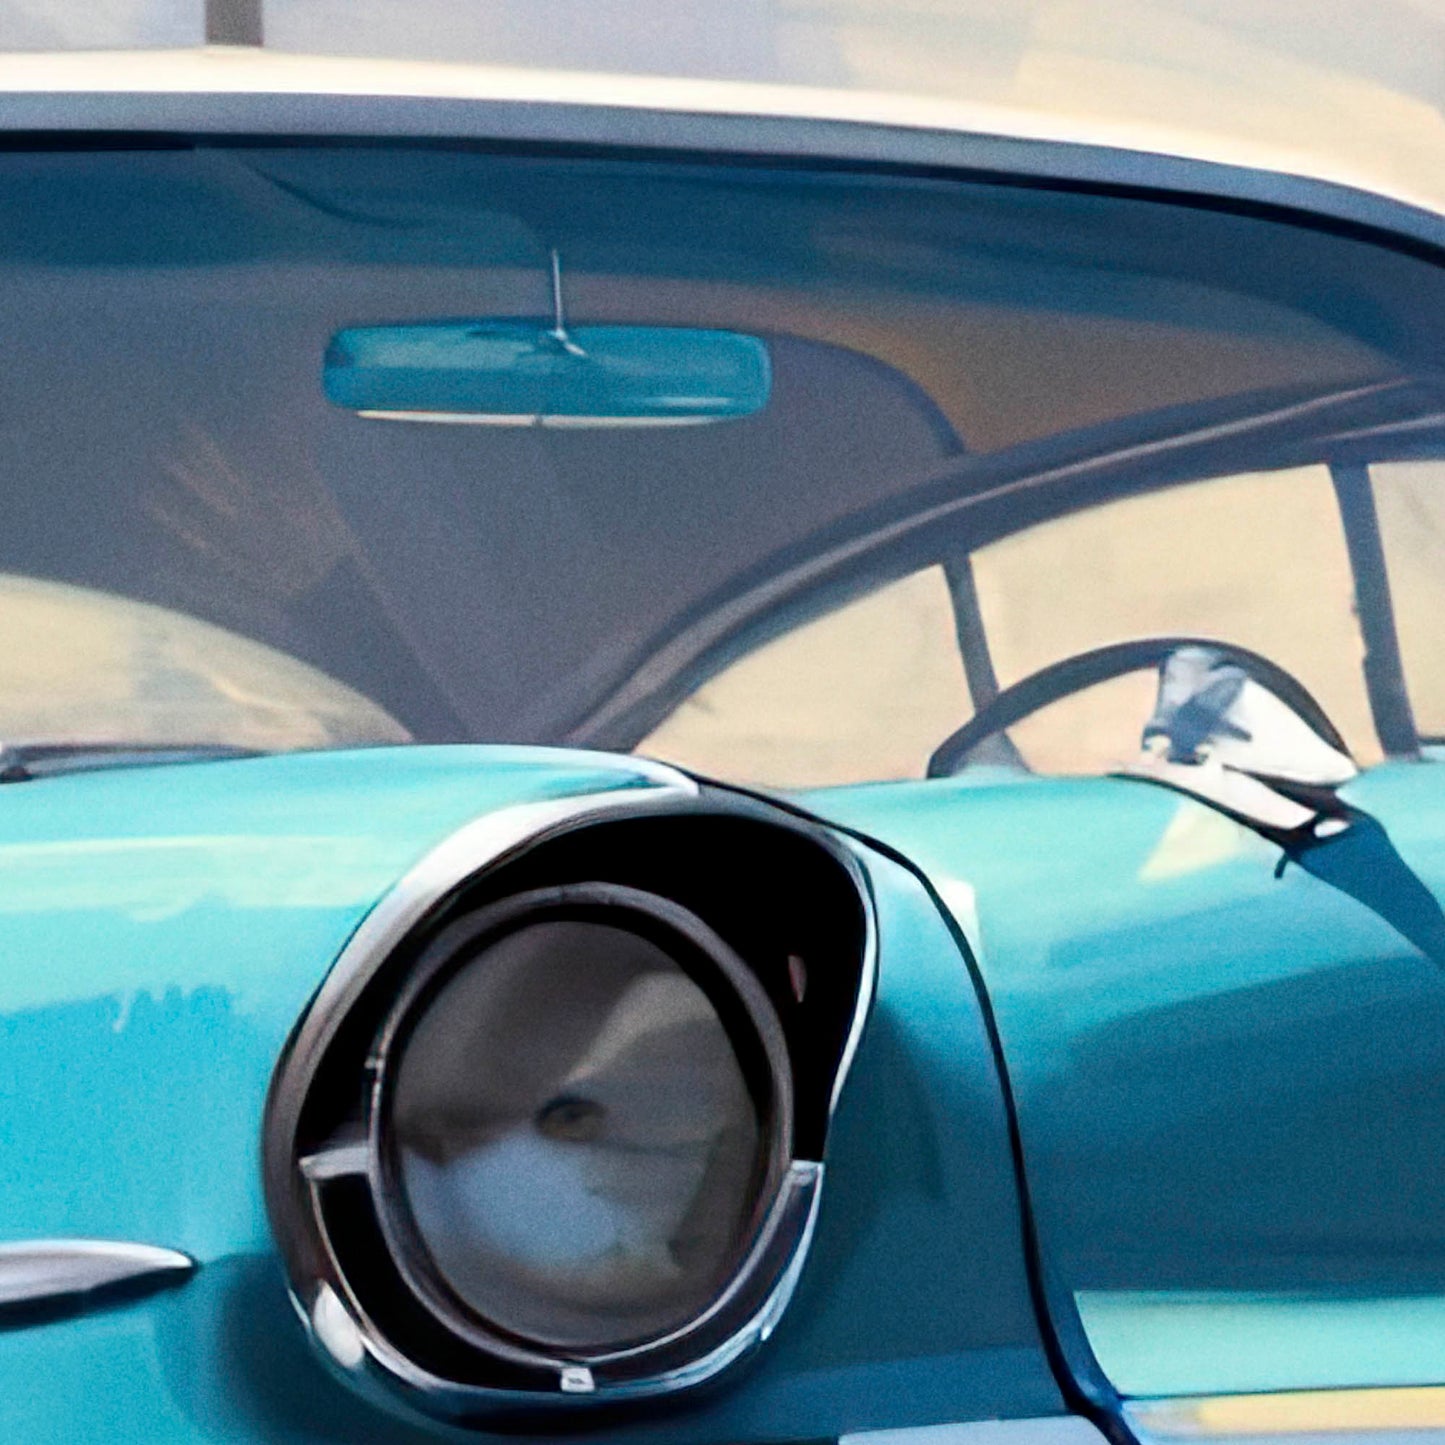 »Turquoise 1950s vintage car 1950s«